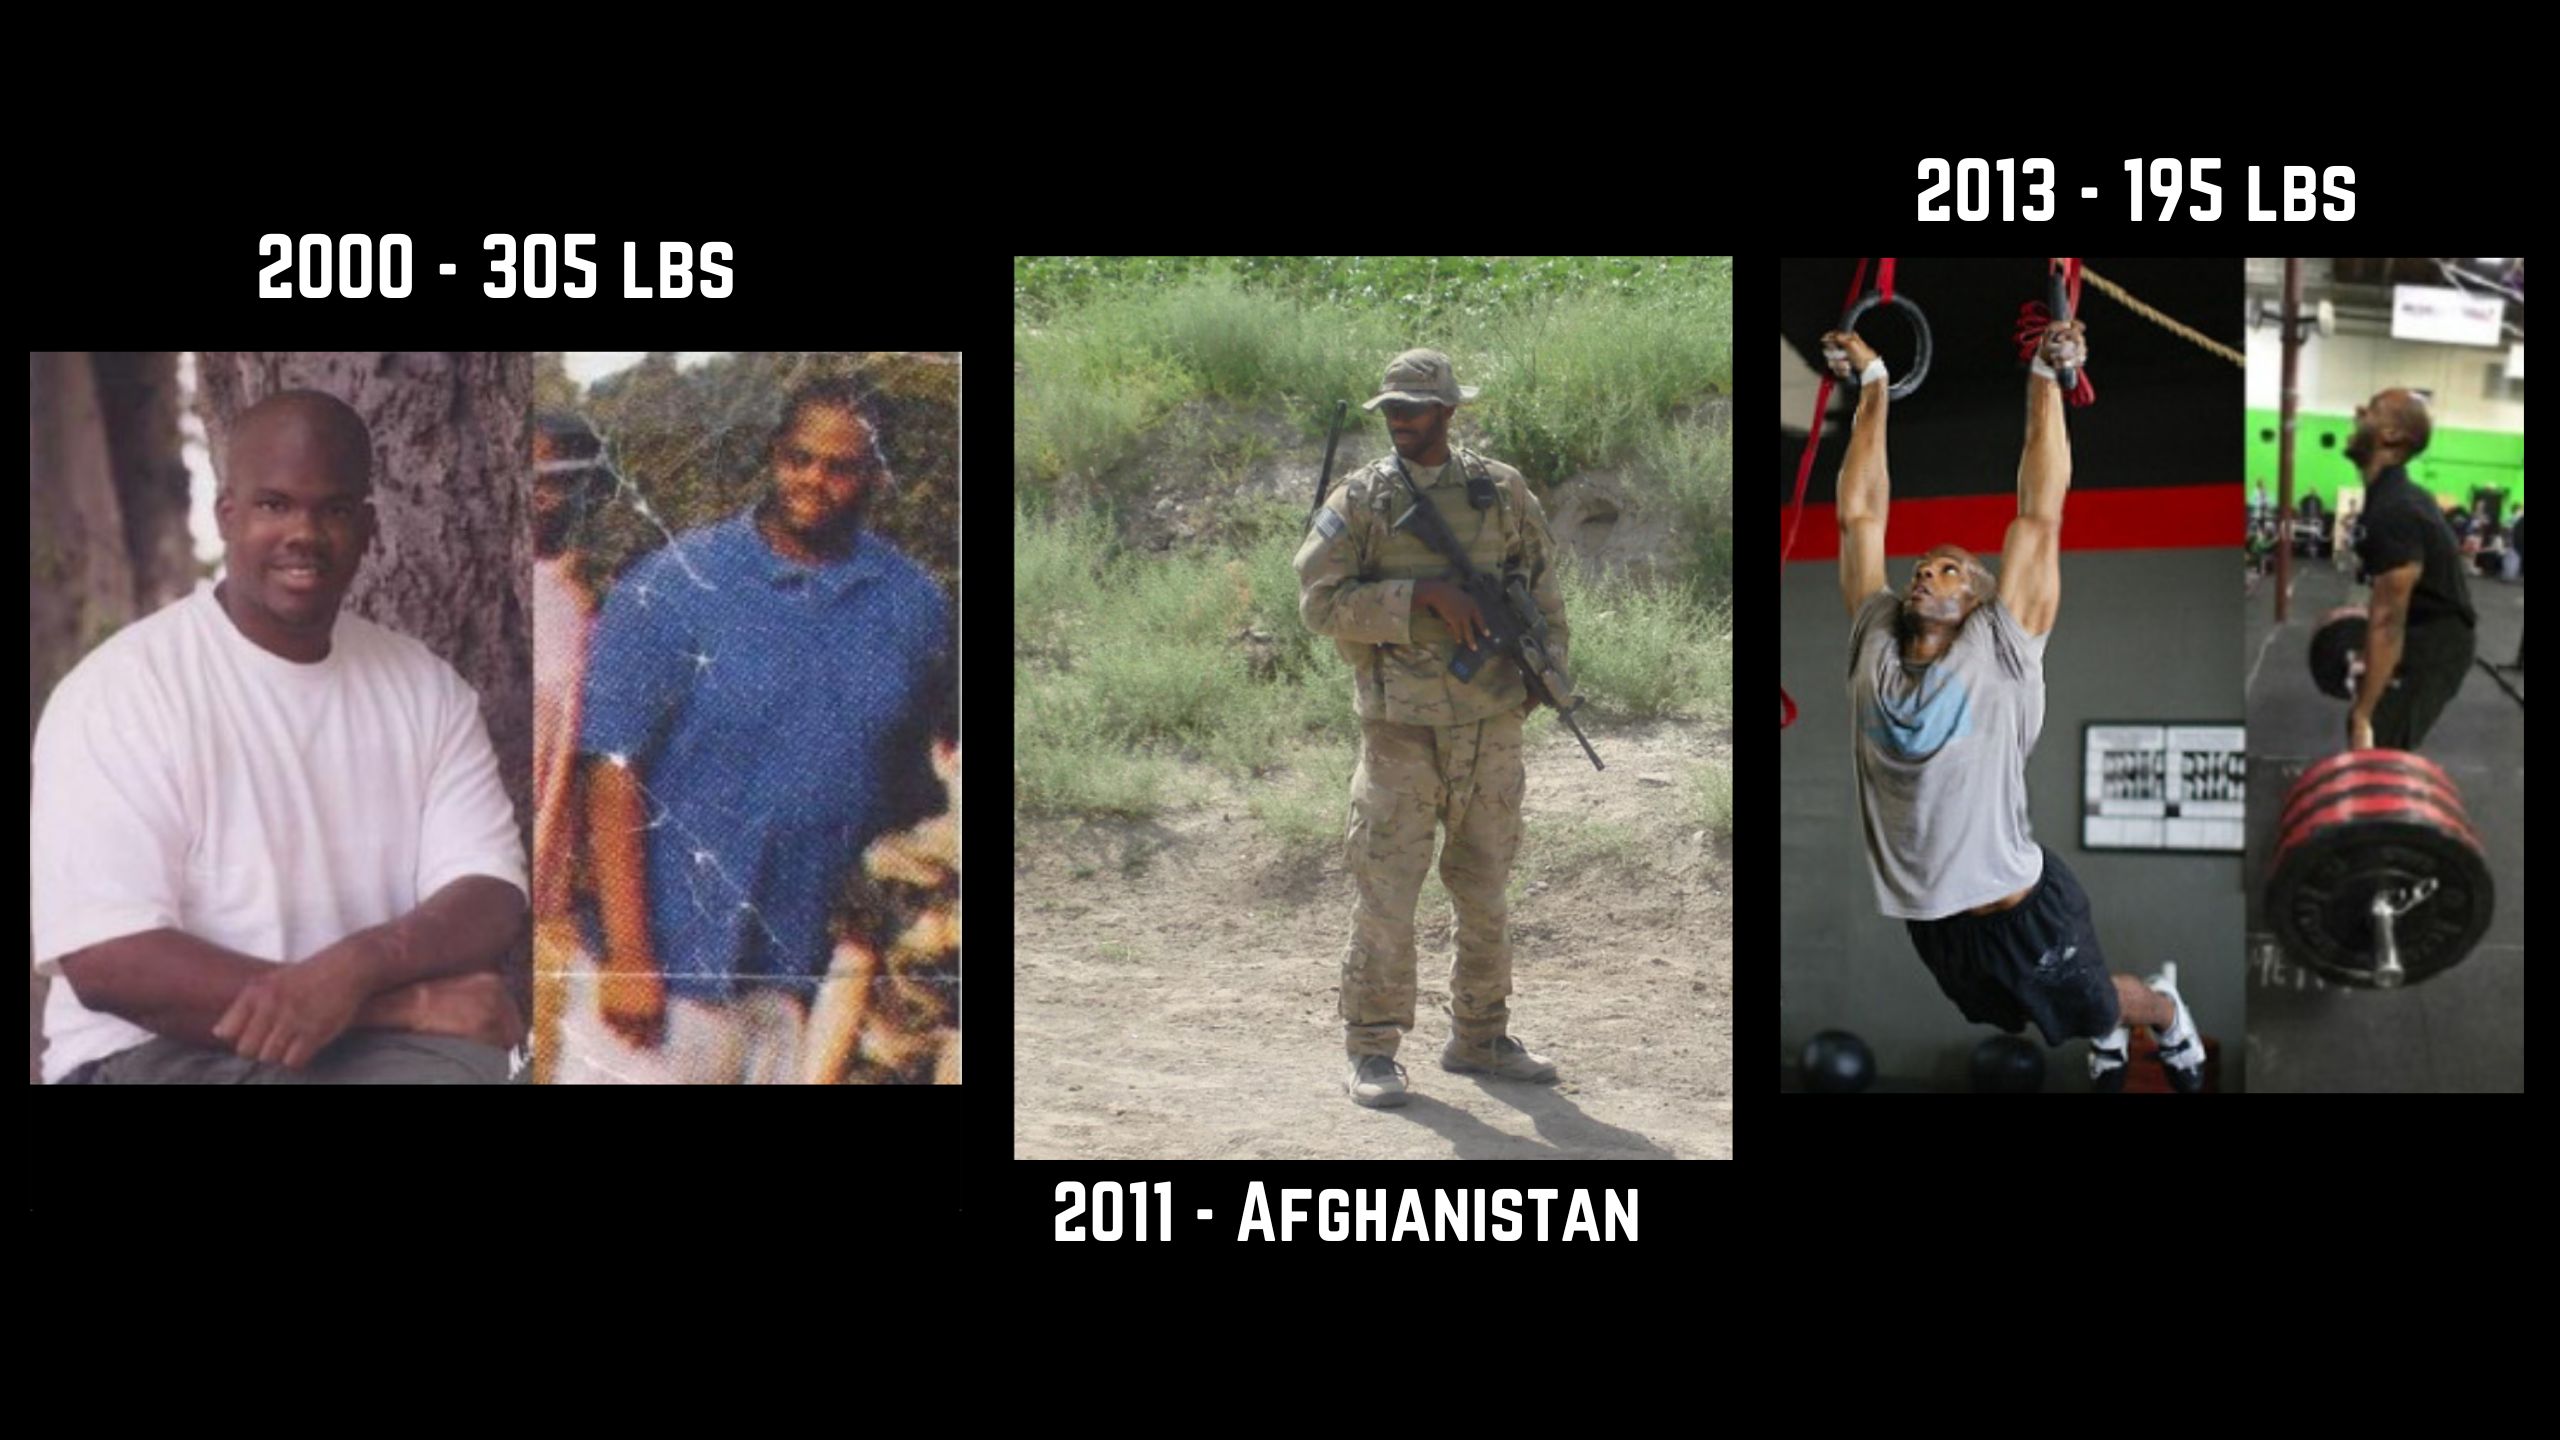 Picture shows the physical evolution of Travis Daigle from 300 pounds in the year 2000, to a Green Beret in Afghanistan in 2011, to a lean 195 pounds doing Crossfit in 2013.